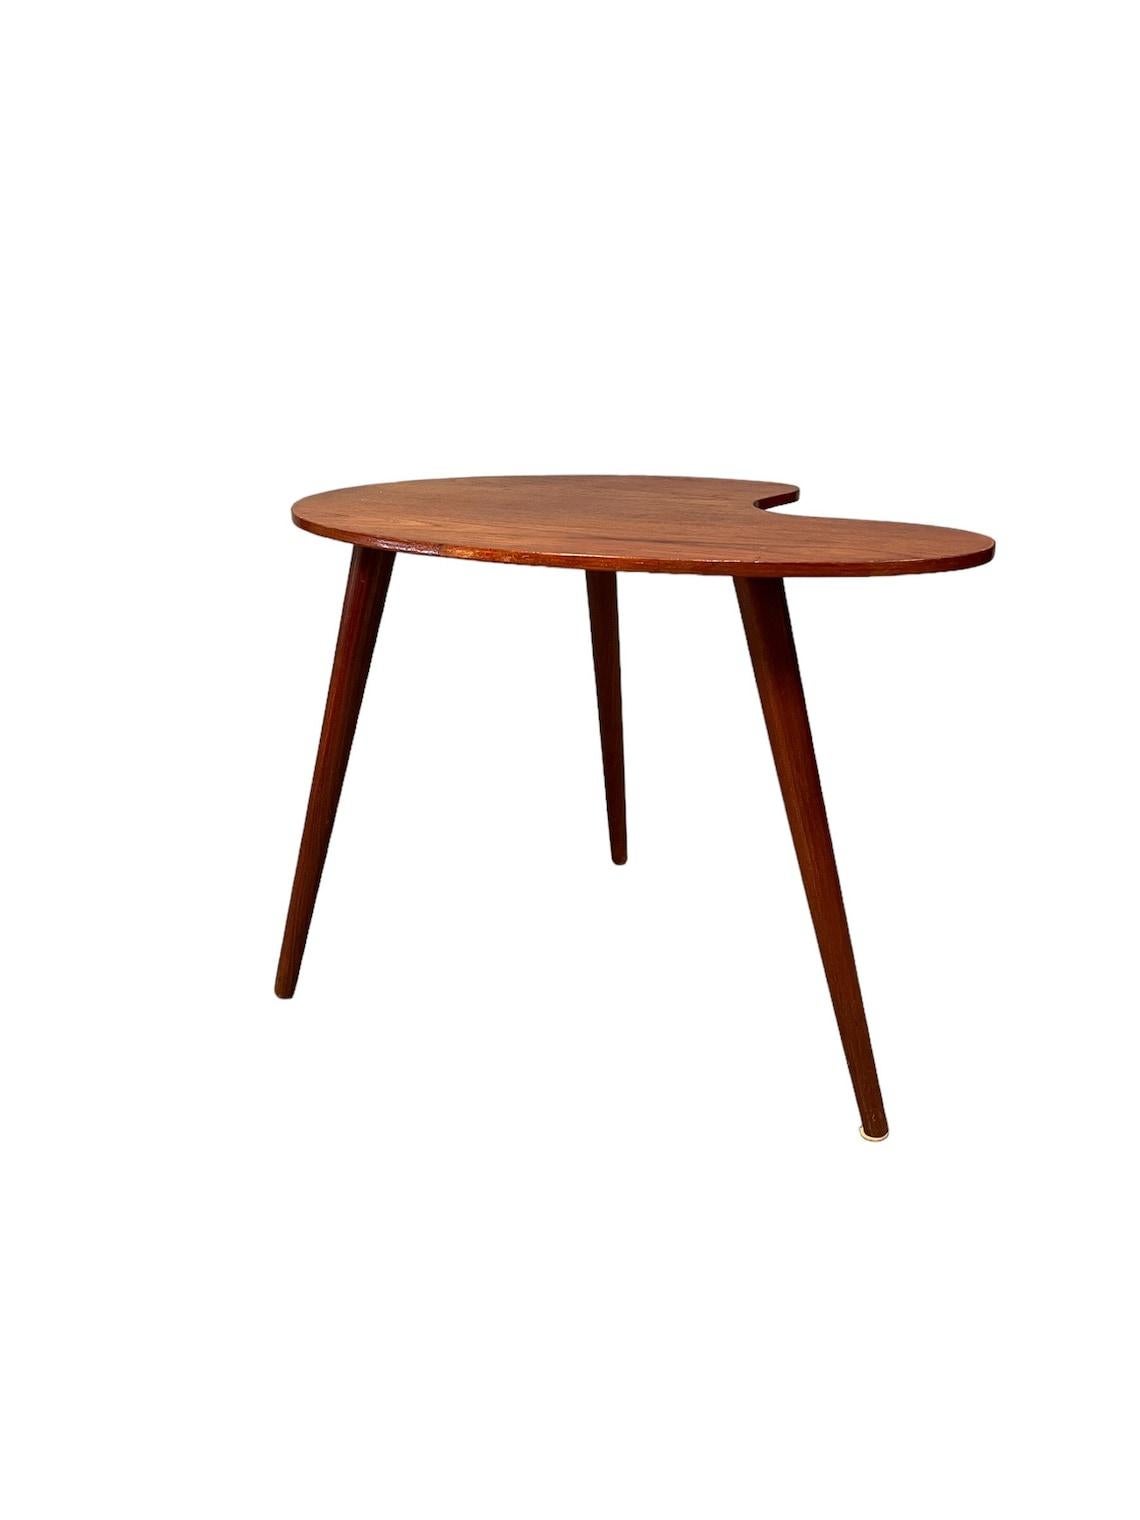 This unique Mid- Century Kidney Shaped End Table in Teak is the perfect addition to any modern home. The table's kidney shape makes it a unique and eye-catching piece that is sure to stand out in any room. Measuring 18 inches in height and 25 inches